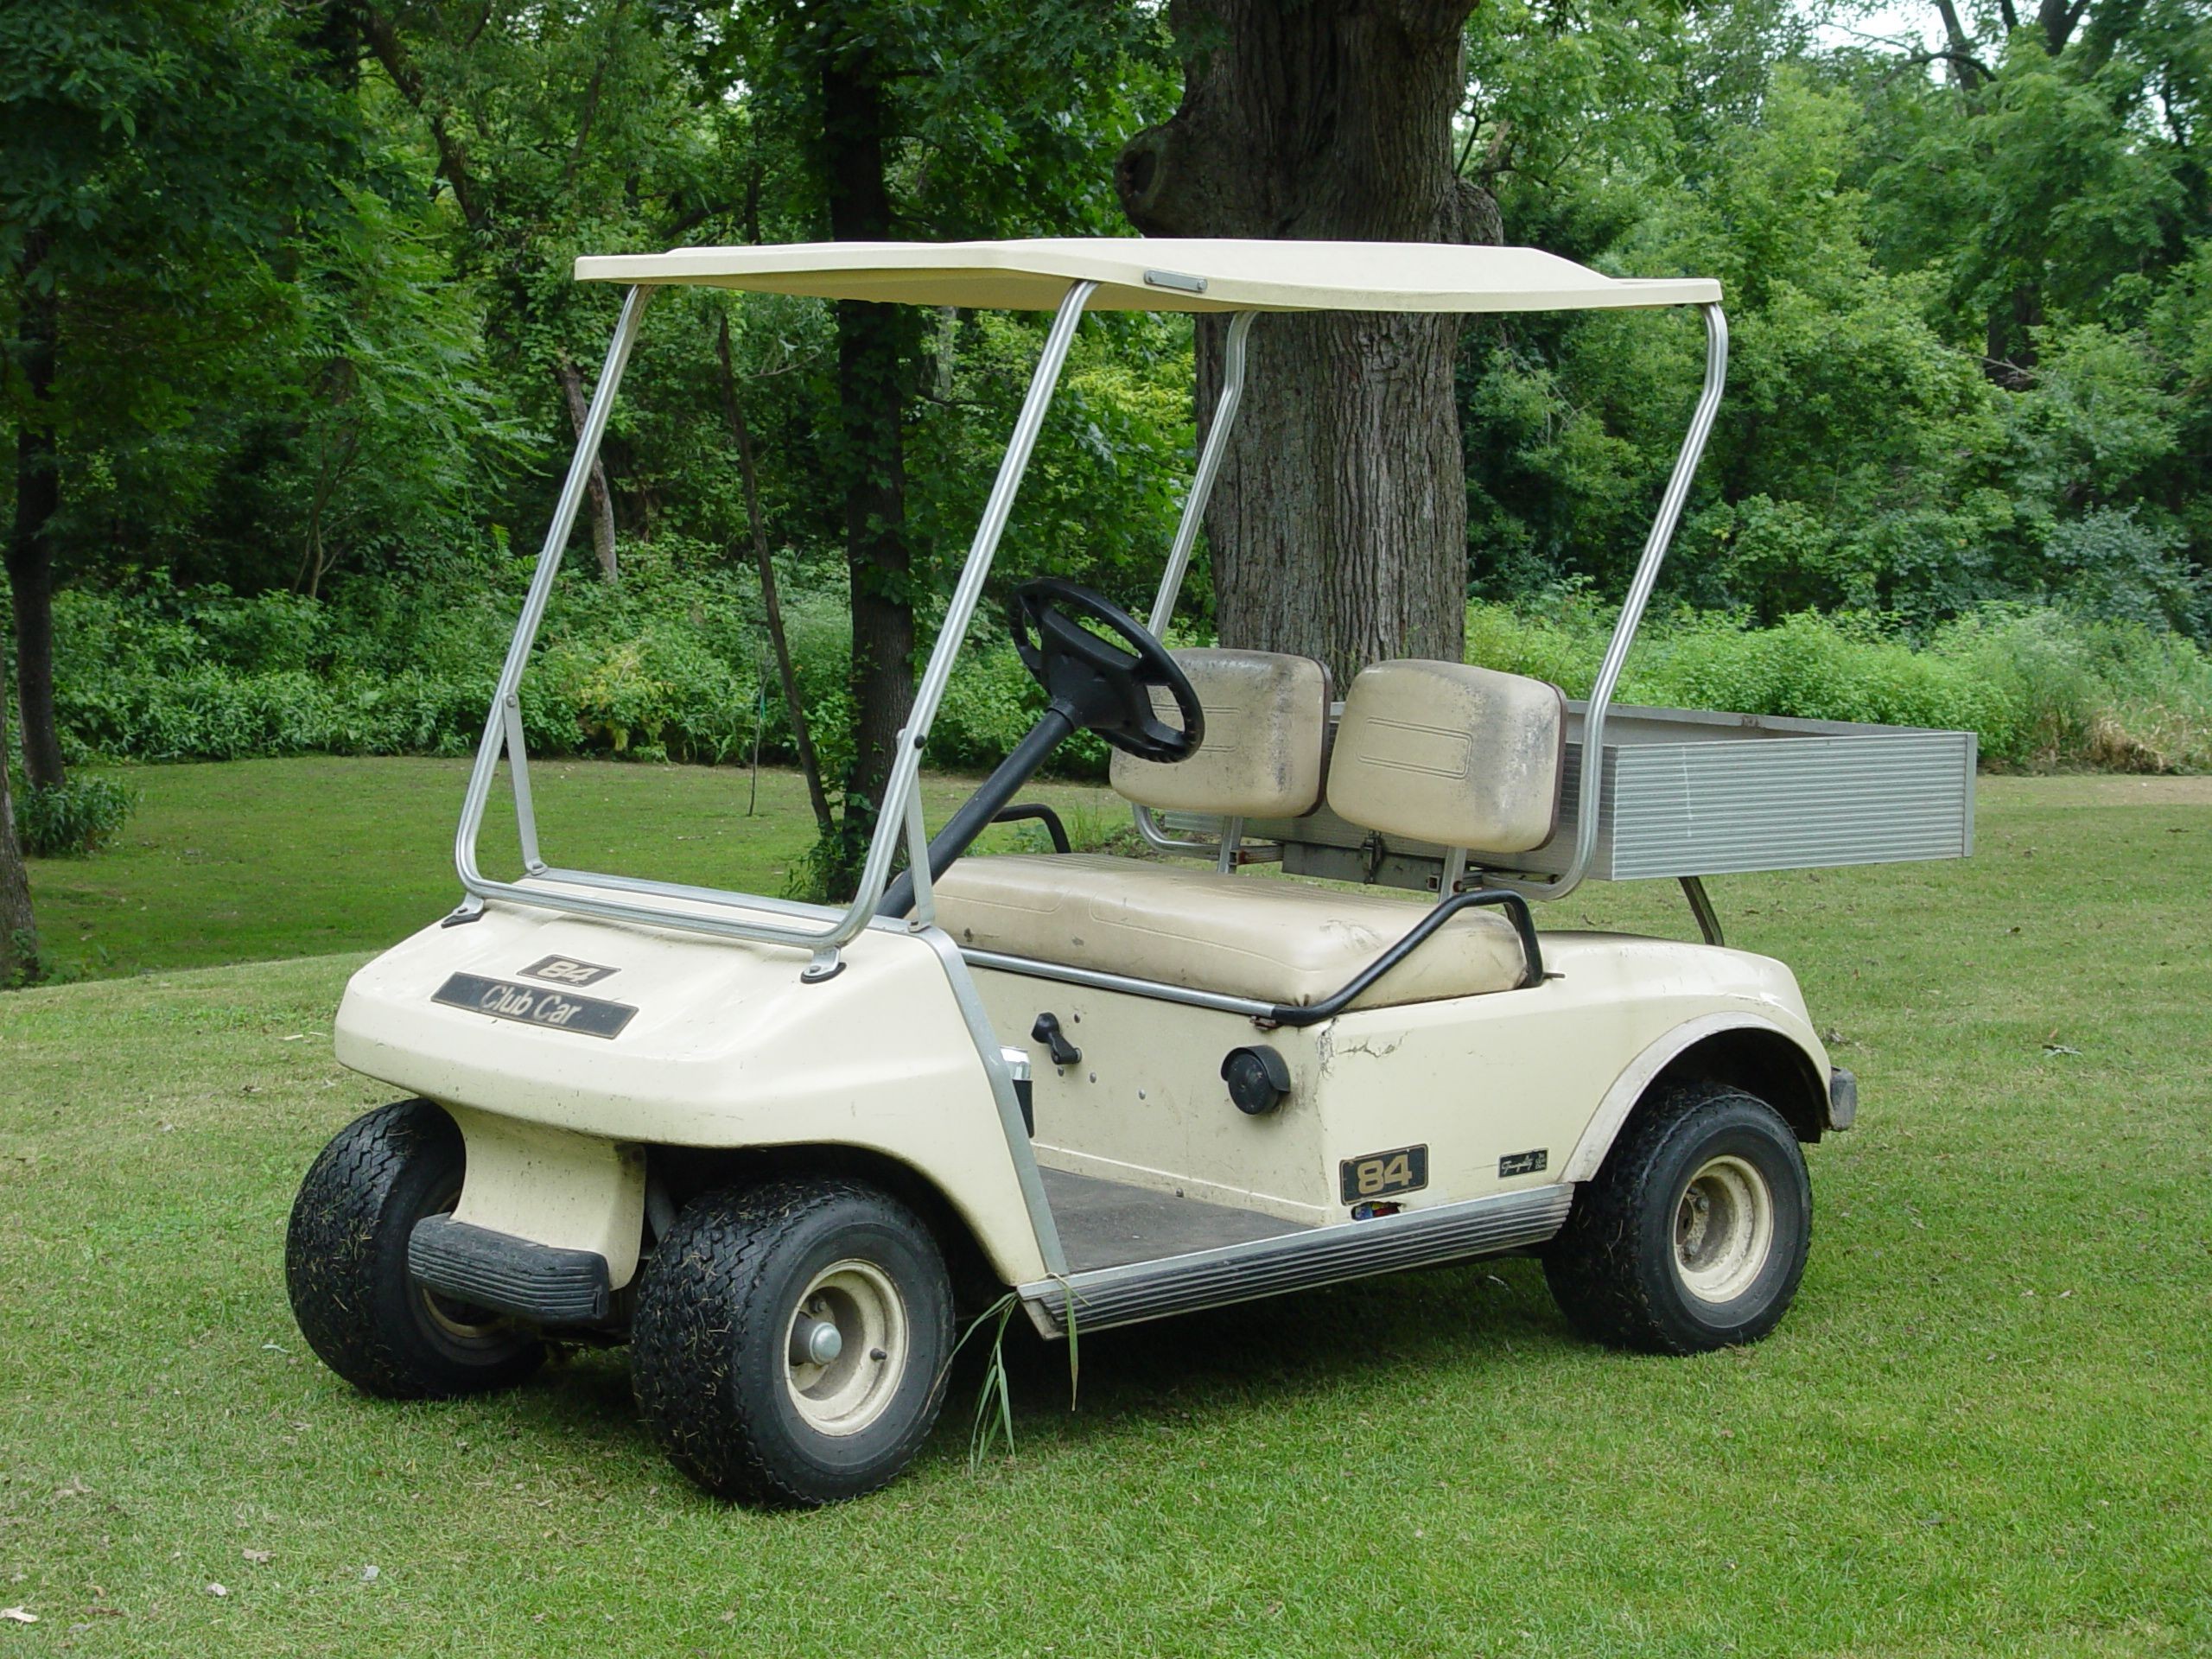 Golf carts are a very popular modity and their popularity is increasing